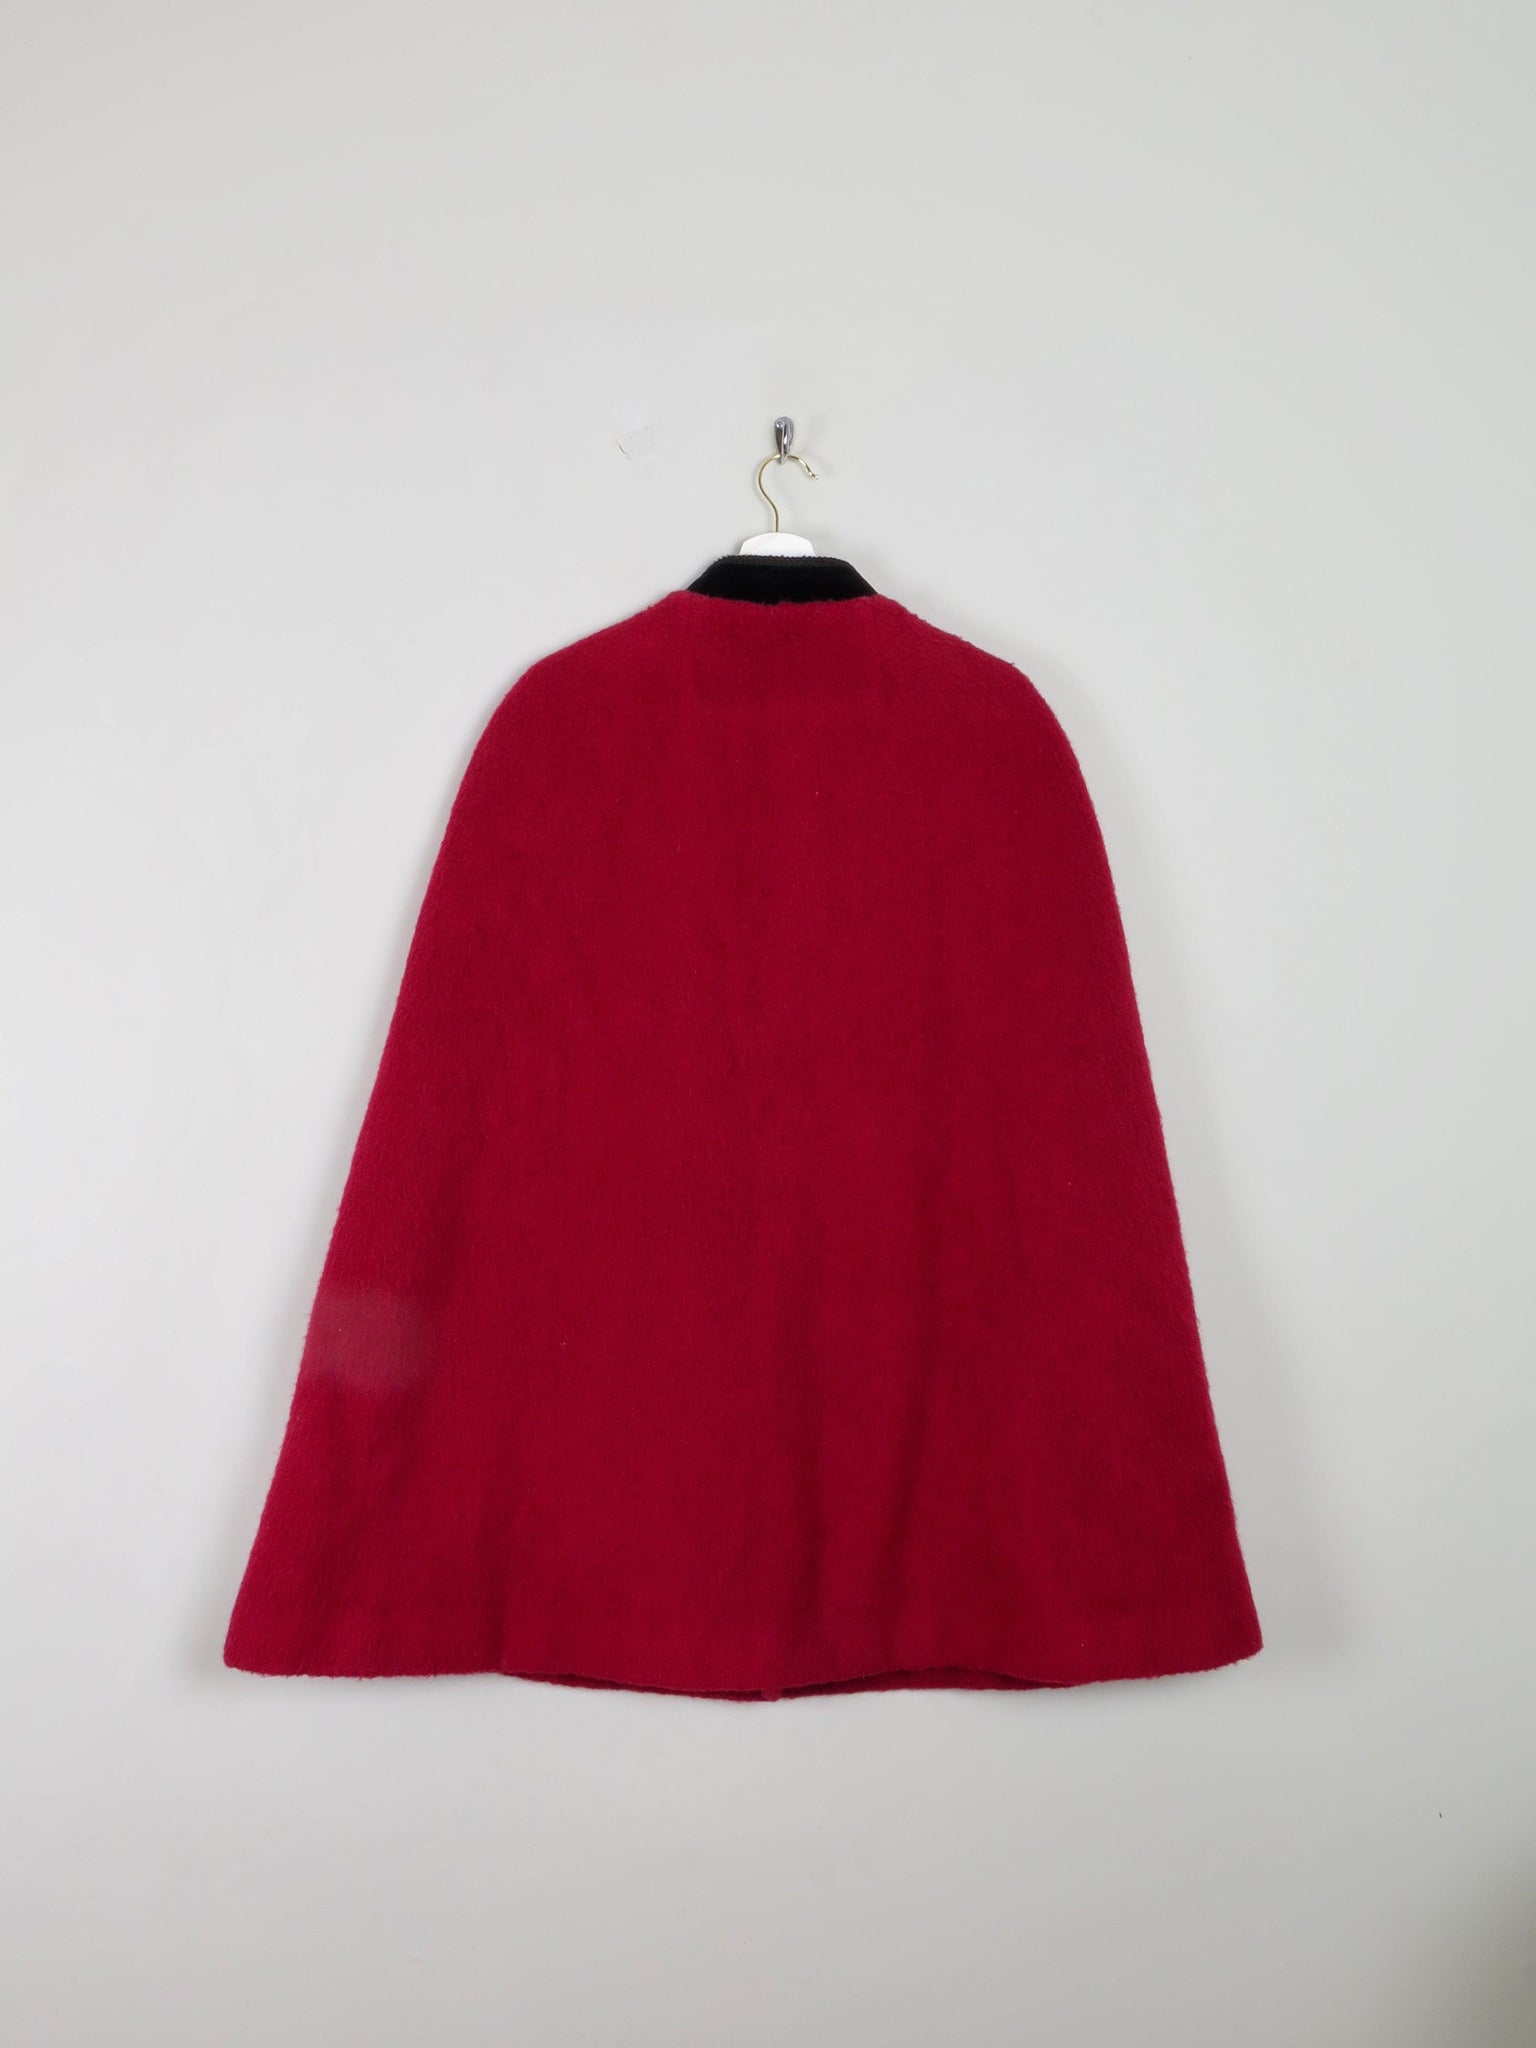 Women's Wool Cherry Red Vintage Cape M/L - The Harlequin